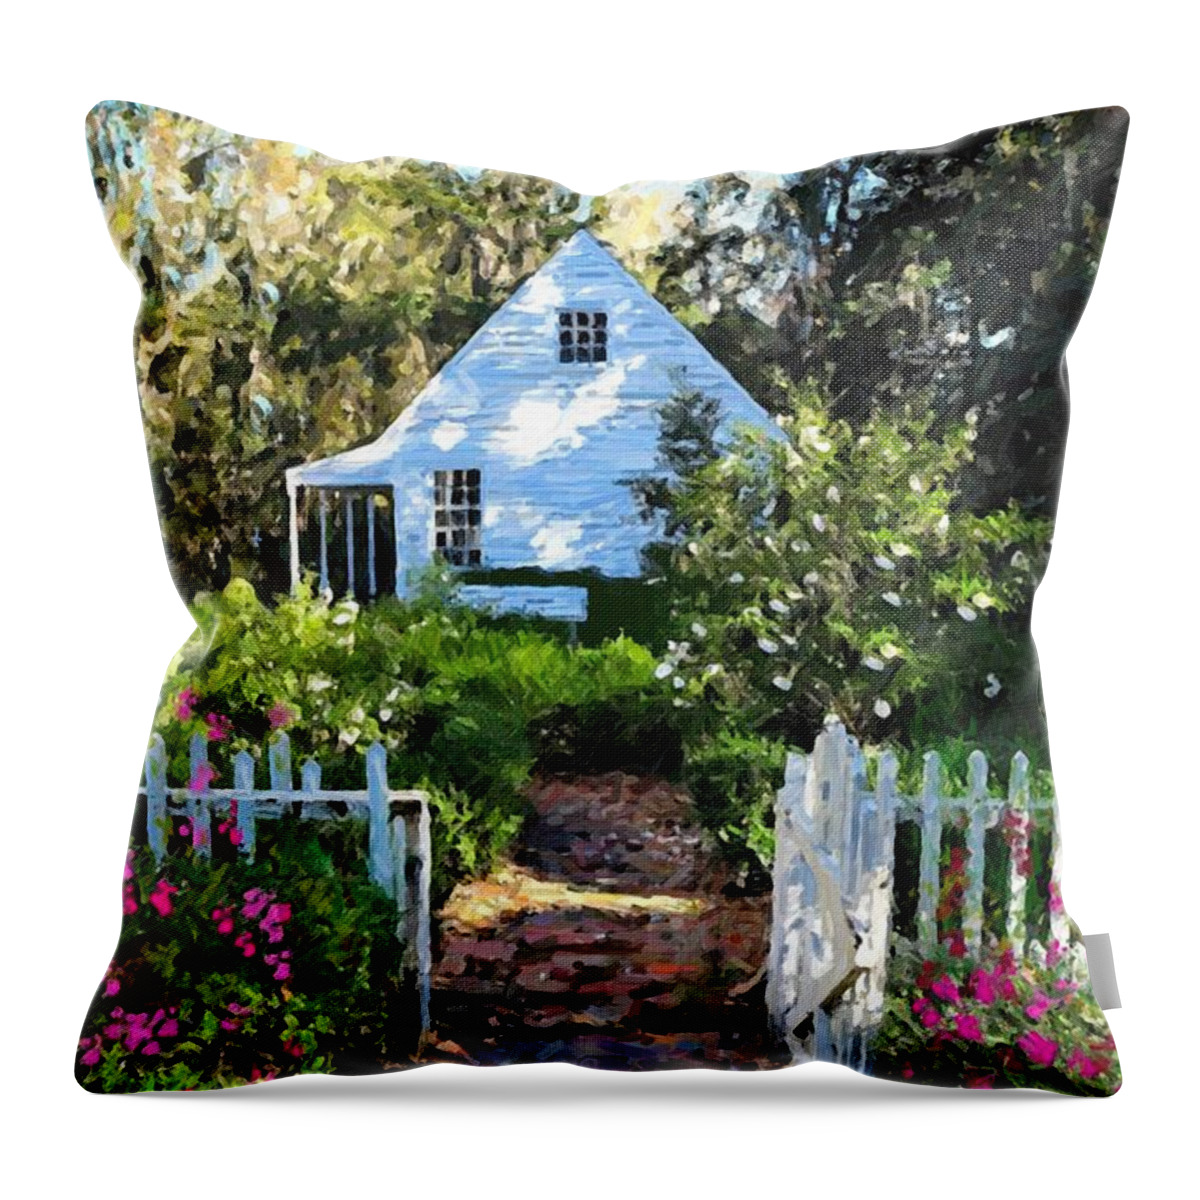 Midway Throw Pillow featuring the painting Midway Garden by Tammy Lee Bradley